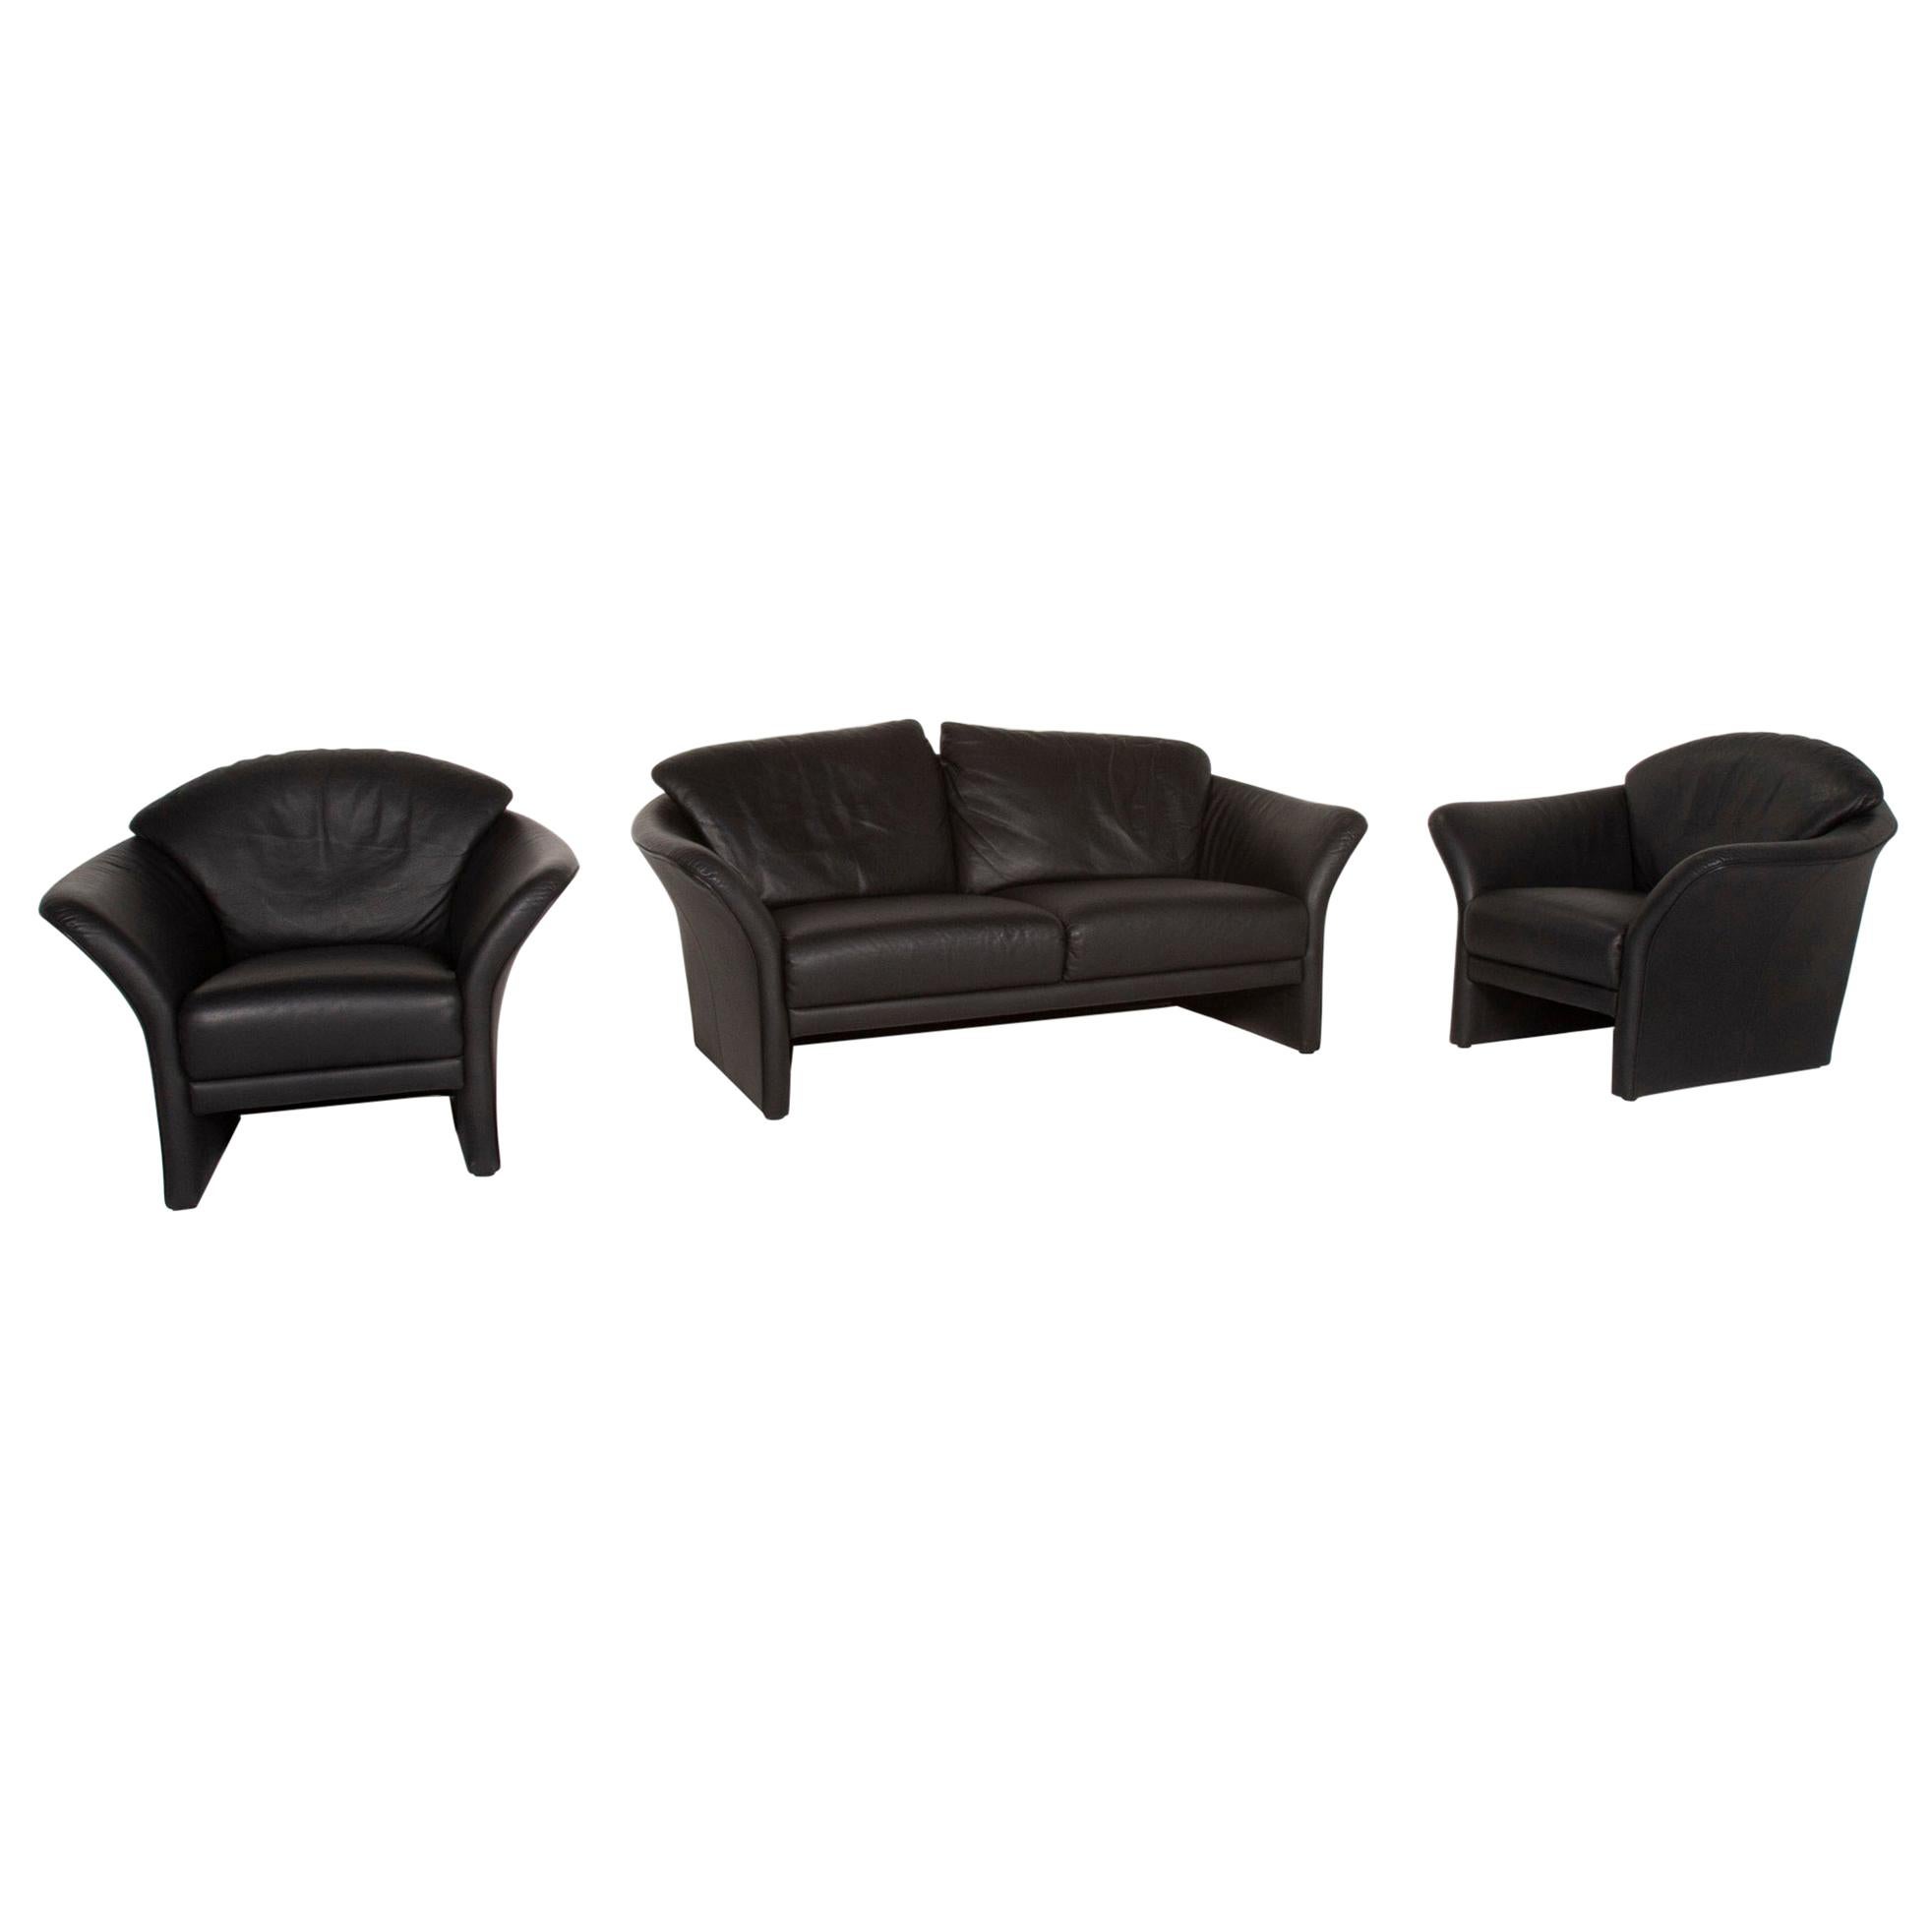 Brühl & Sippold Boa Leather Sofa Set Black Two-Seat Armchair For Sale